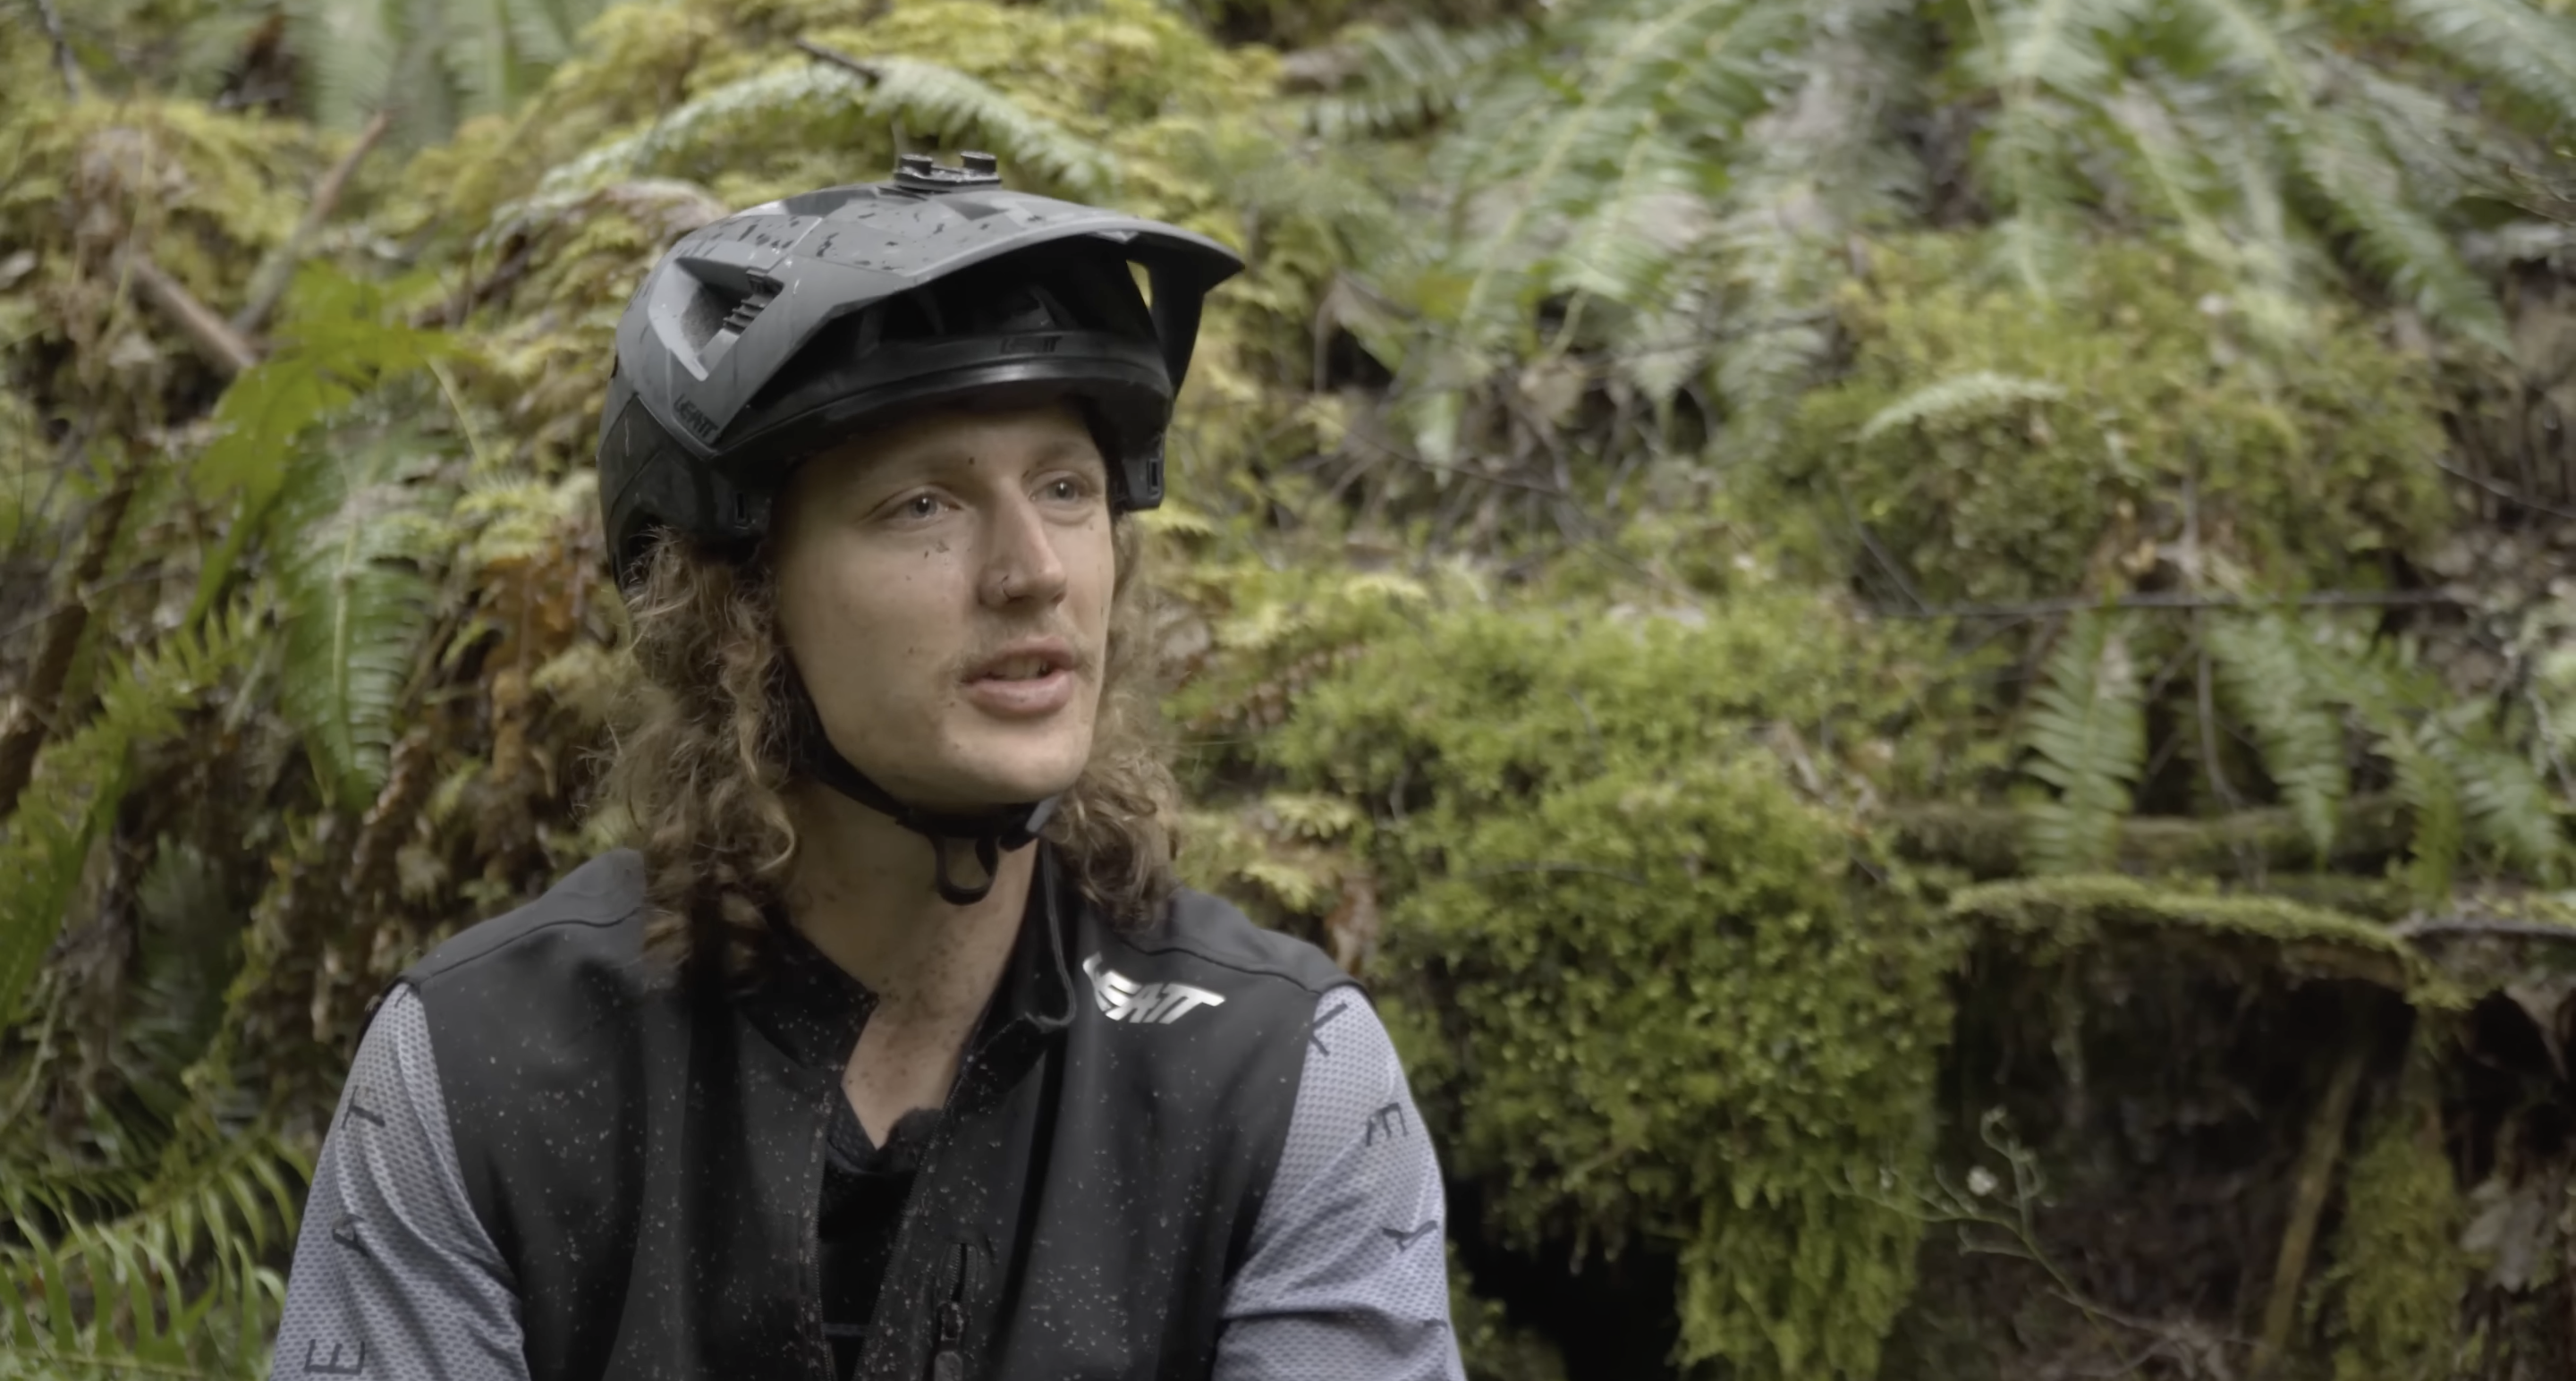 The Real Life Of A Professional Mountain Bike Racer (Video)